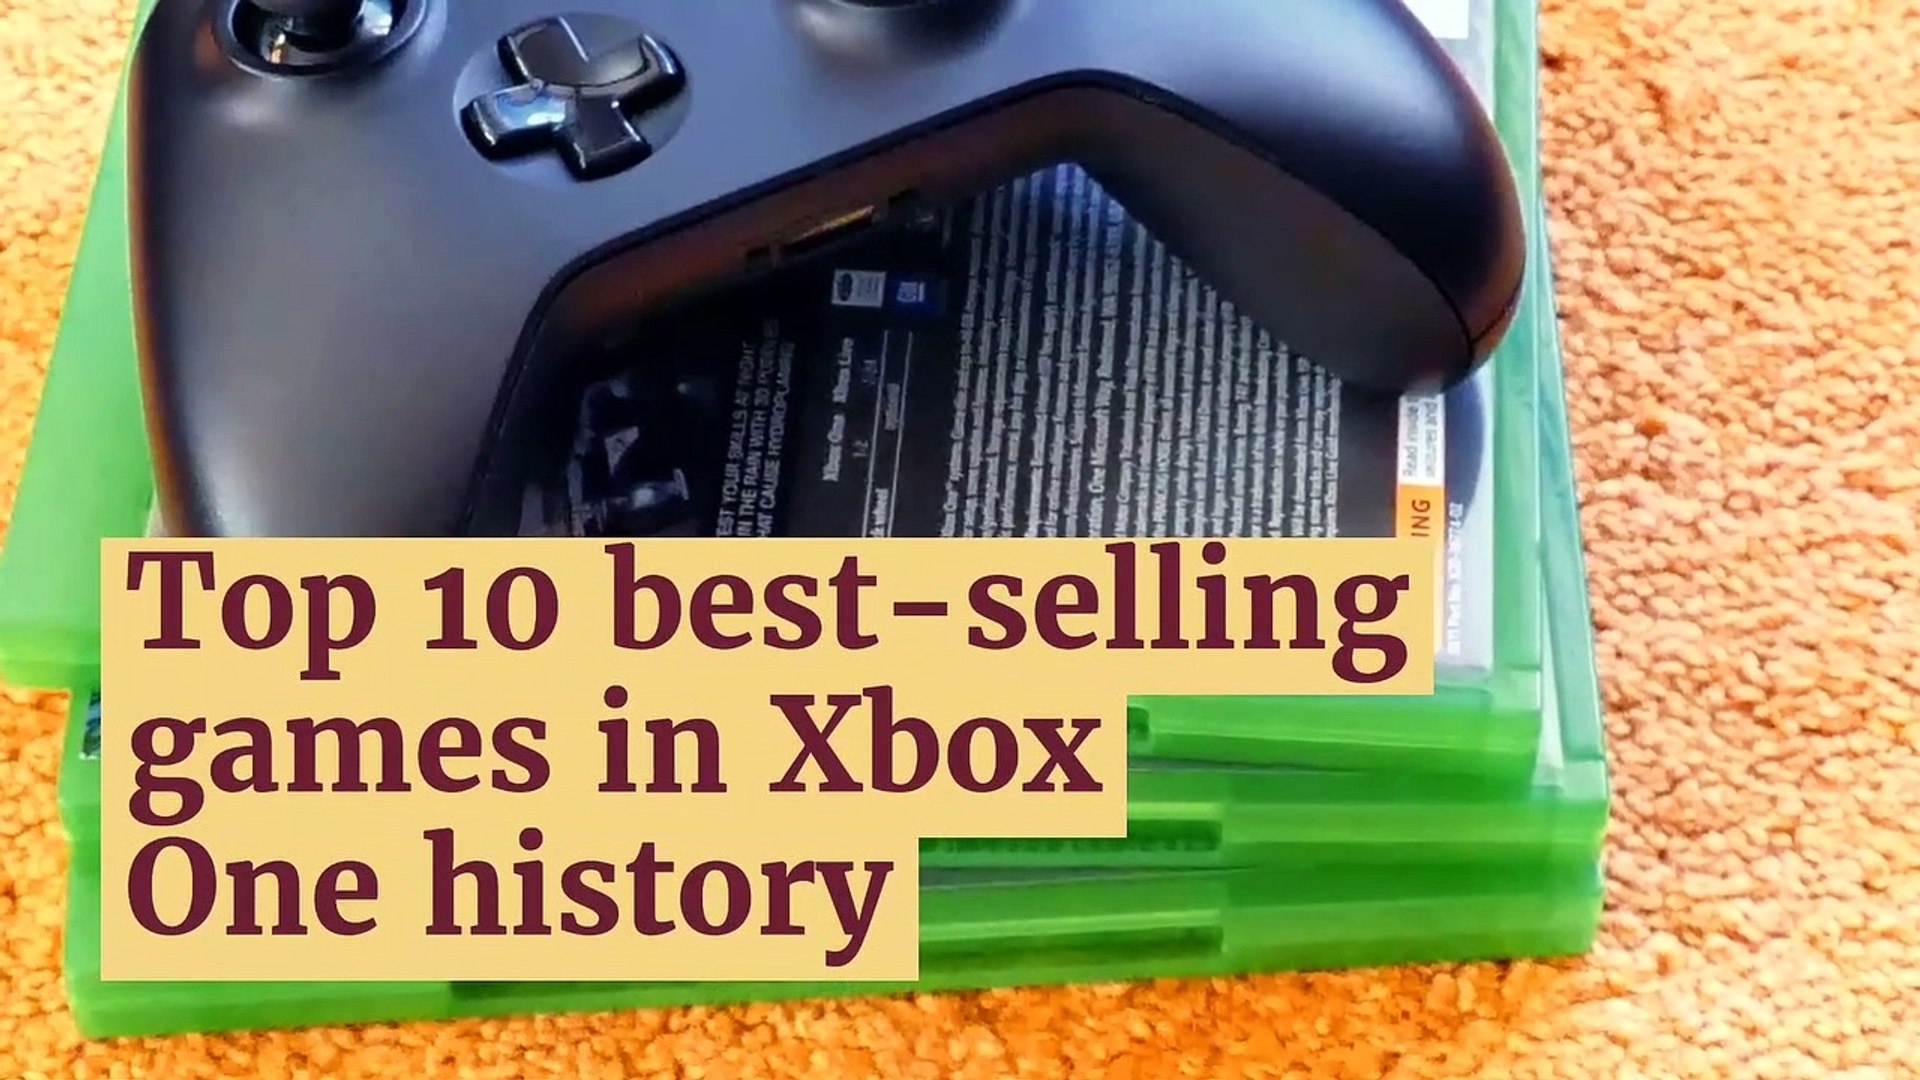 Top 10 Best-Selling Xbox Games of All Time